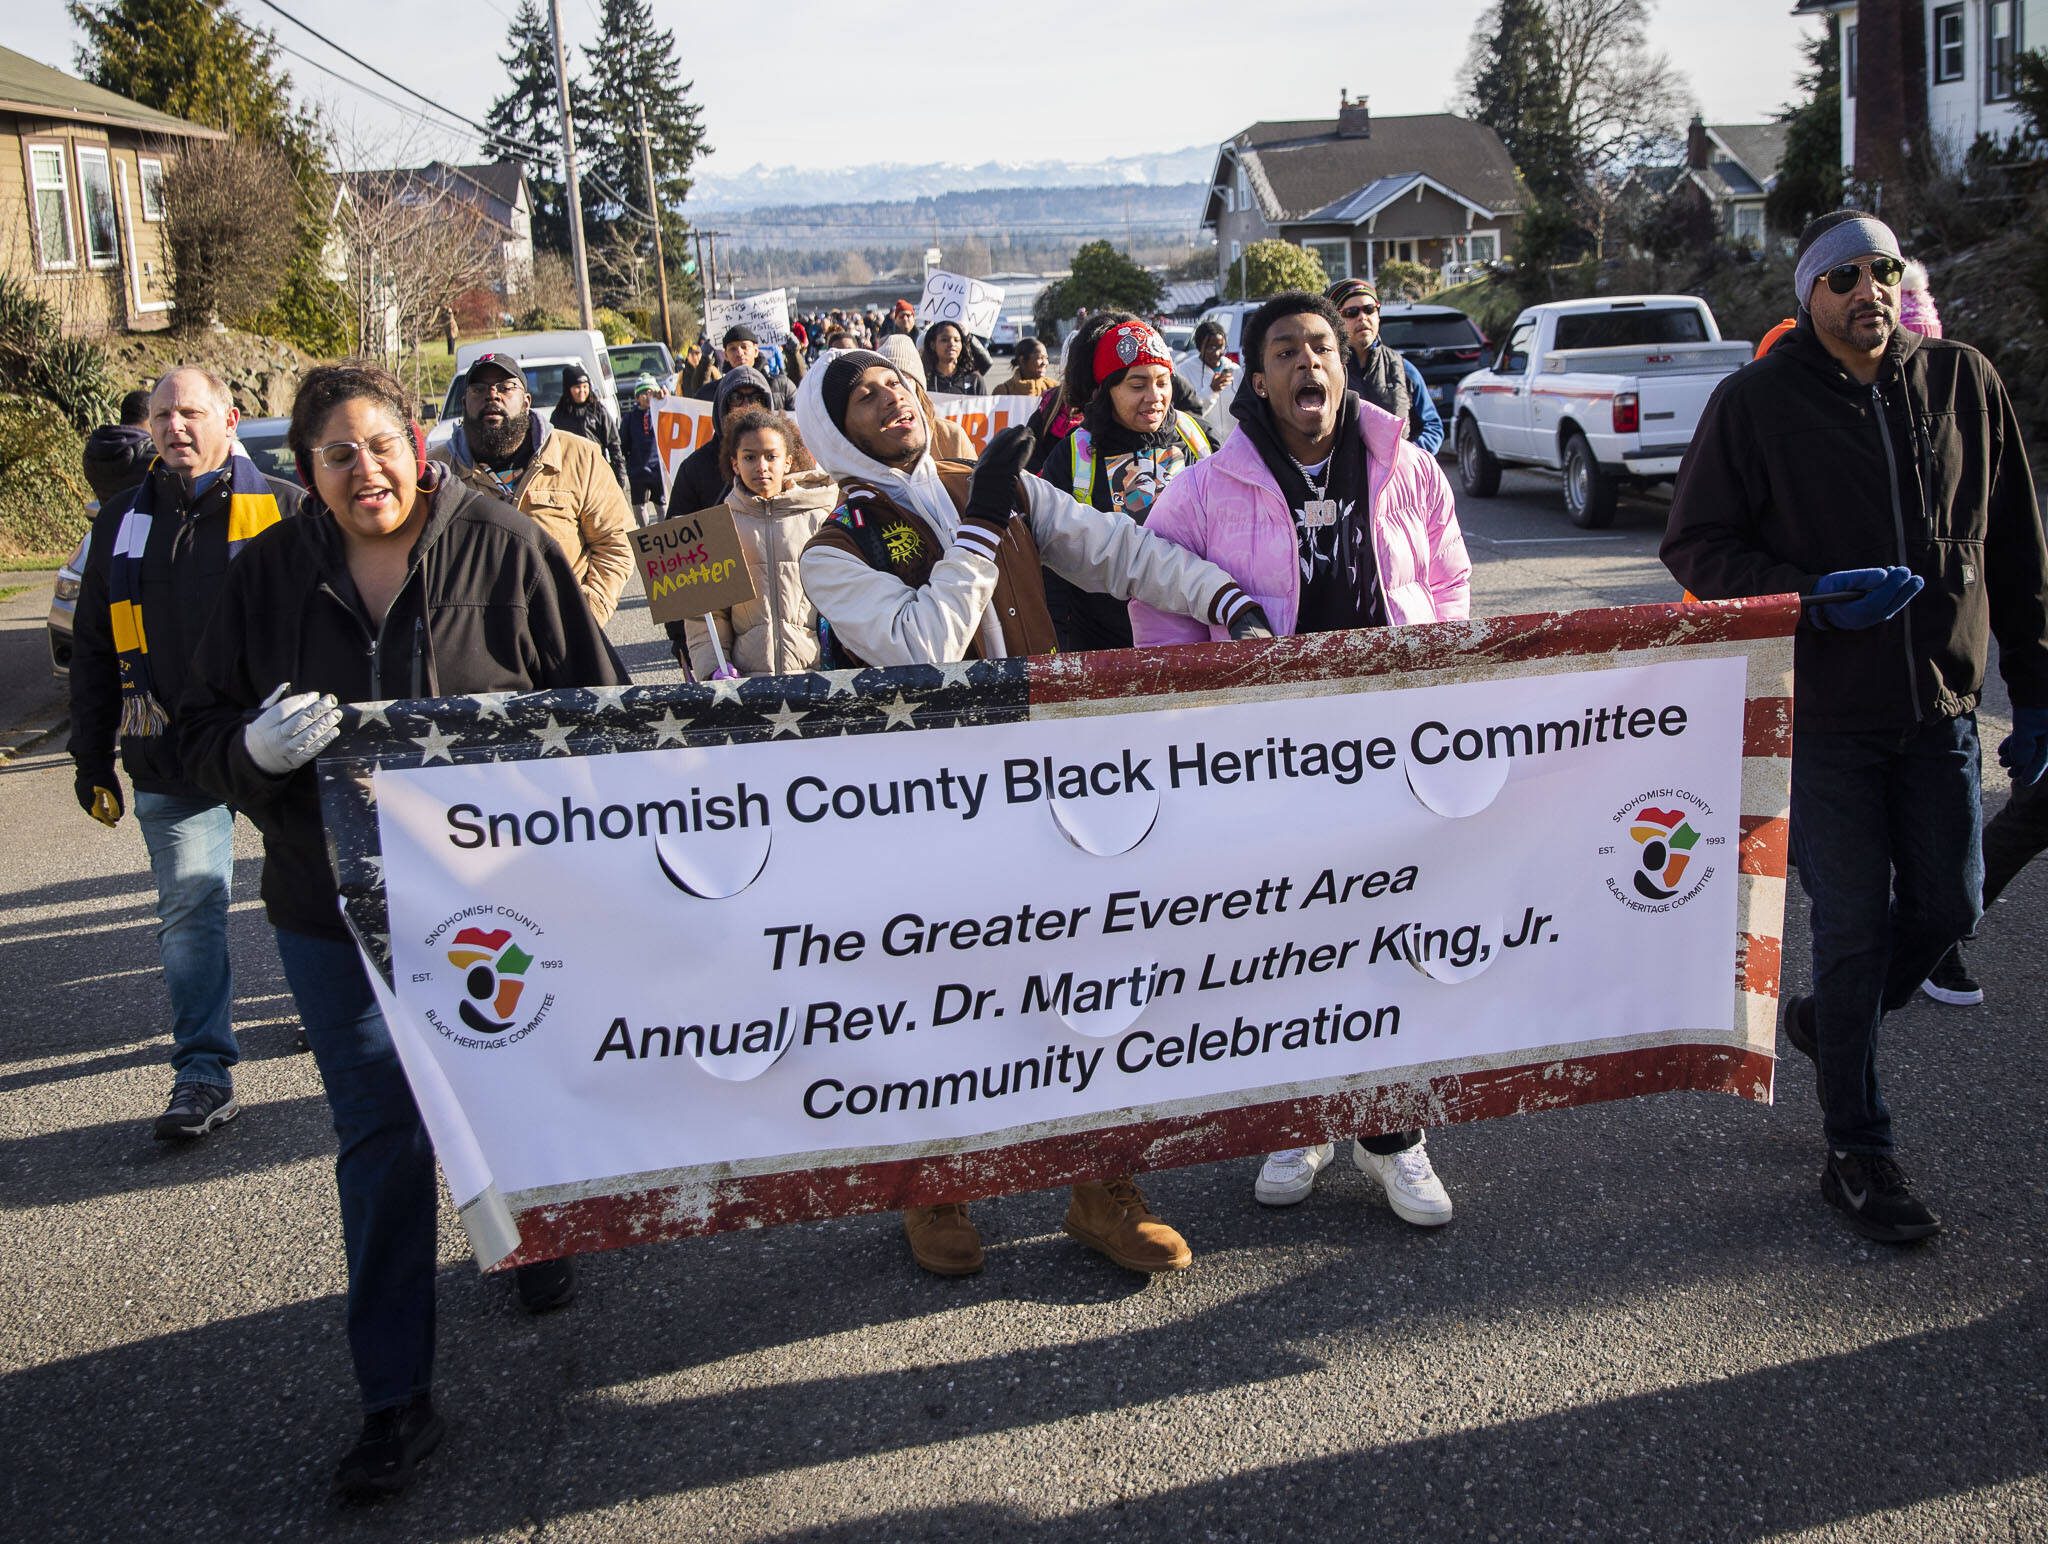 Noah Jackson, right, and Daniel “Prince” Cacho, left, sing while they lead a group of approximately 100 people Monday in a Martin Luther King Jr. Day march in Everett, Washington. (Olivia Vanni / The Herald)